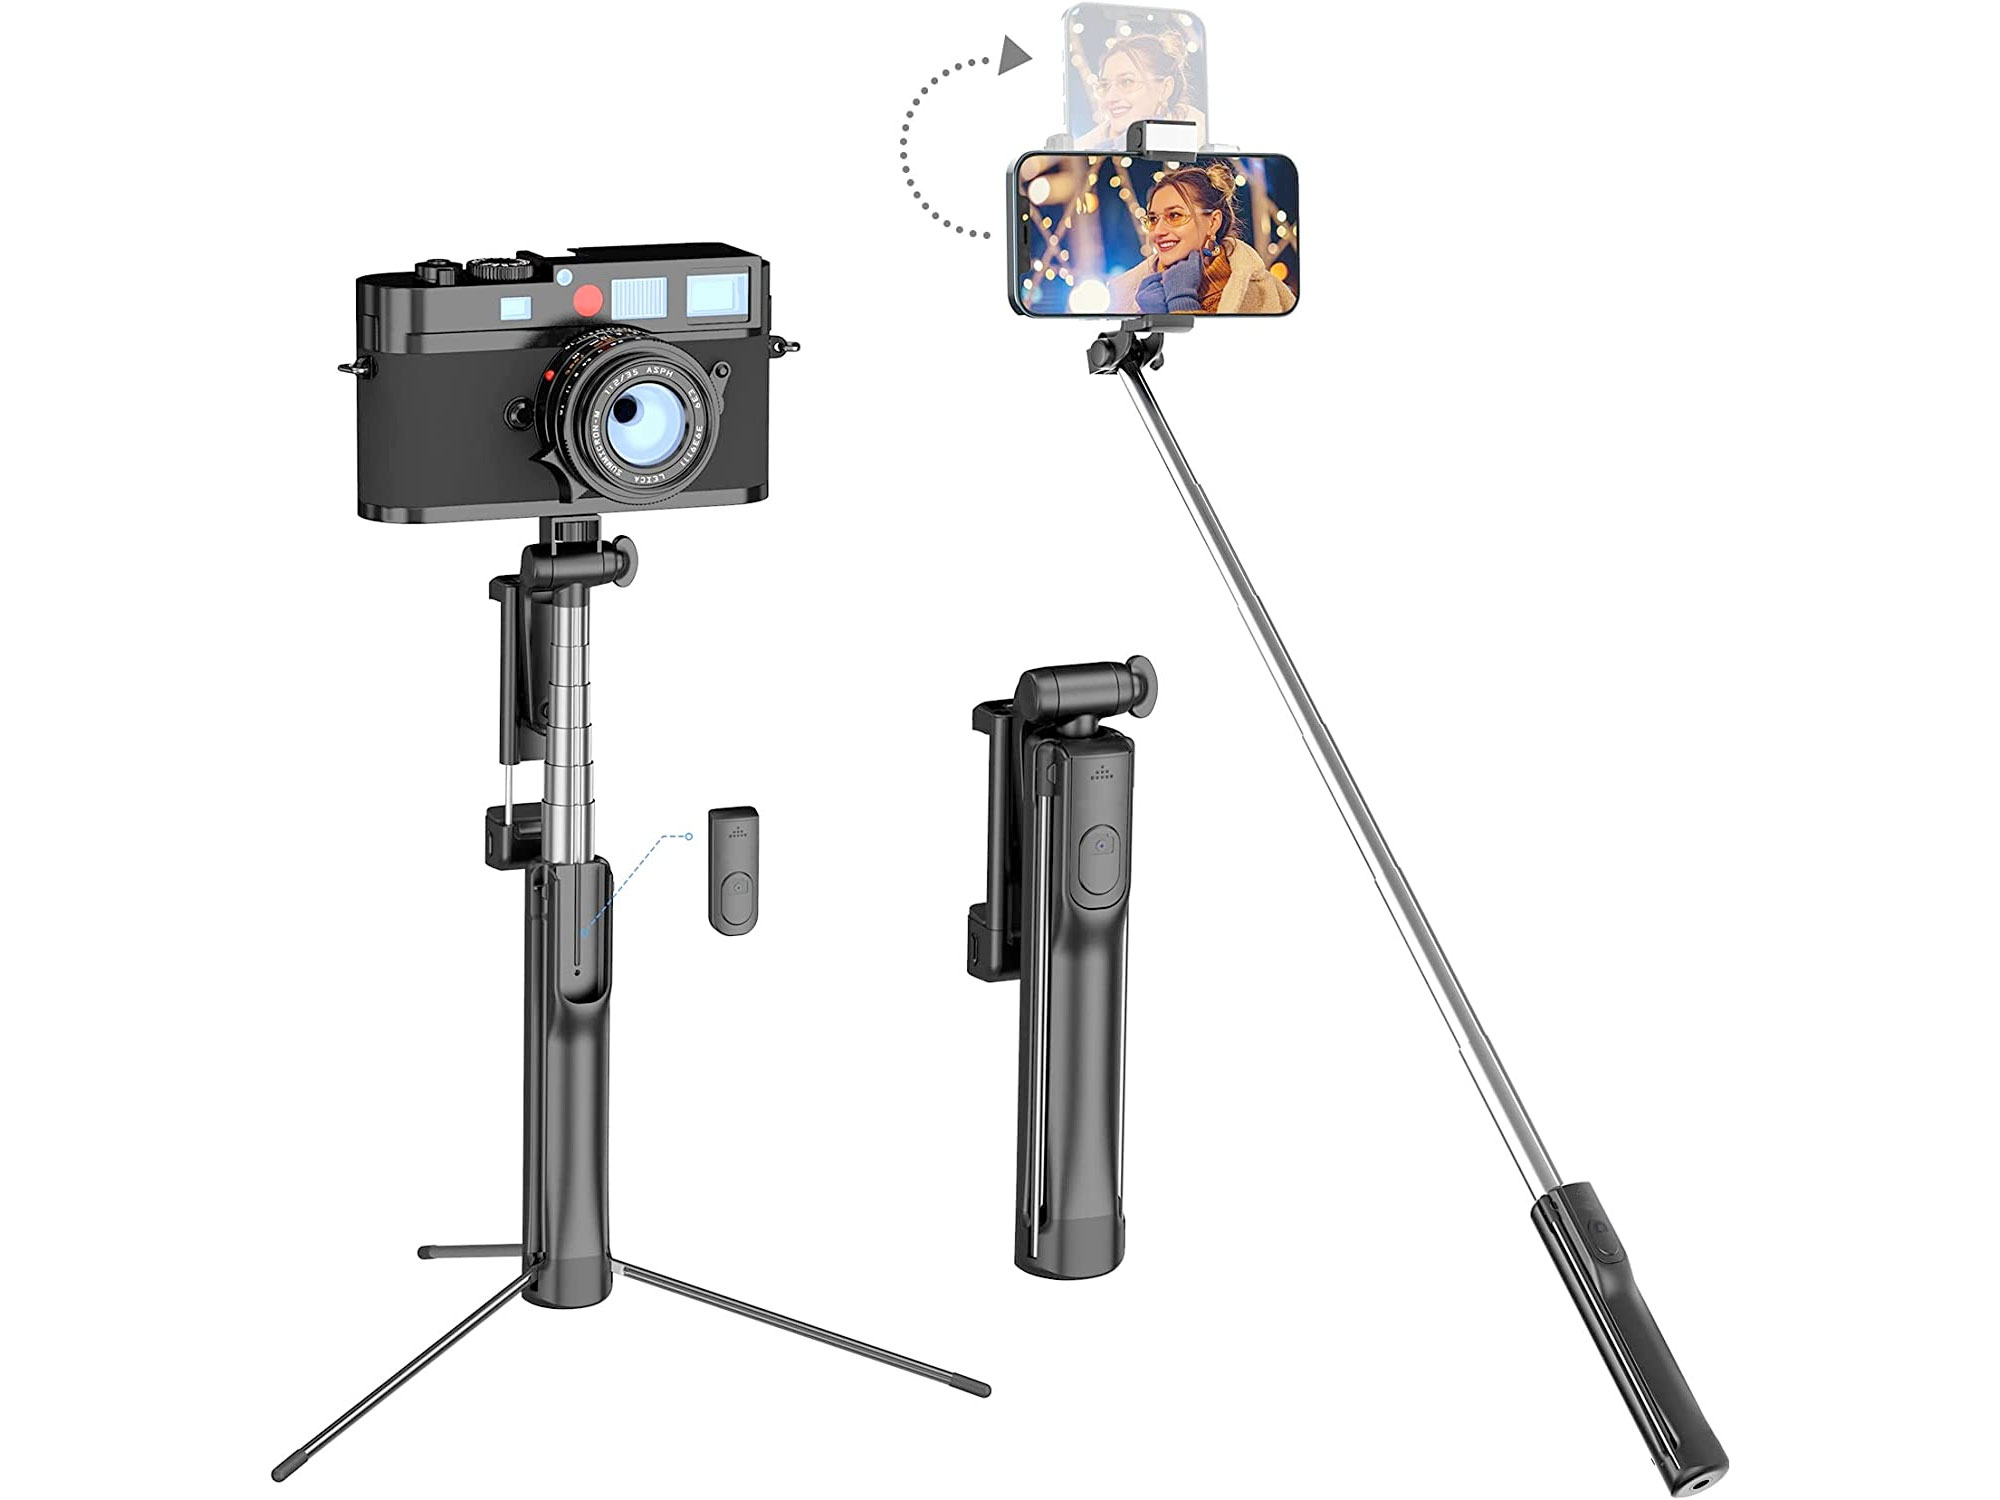 Amazon：Selfie Stick Tripod with Fill-in Light and Remote只賣$9.99